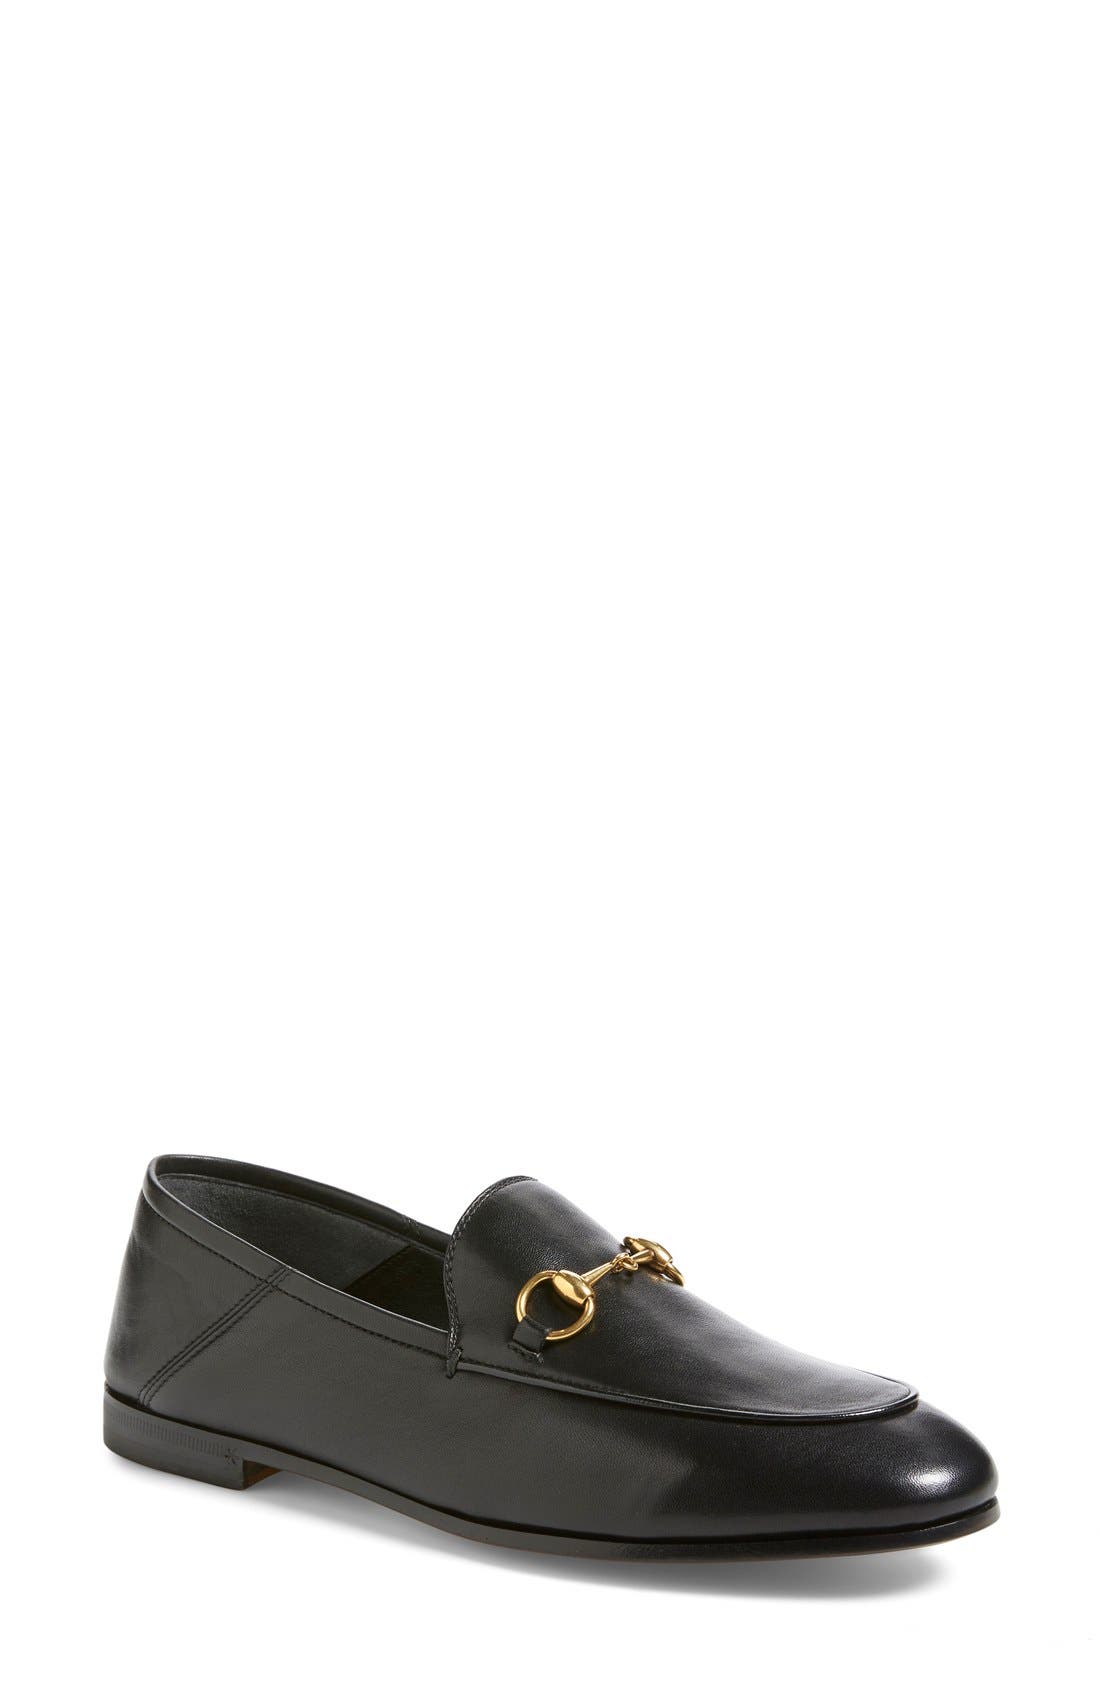 brixton gucci loafer